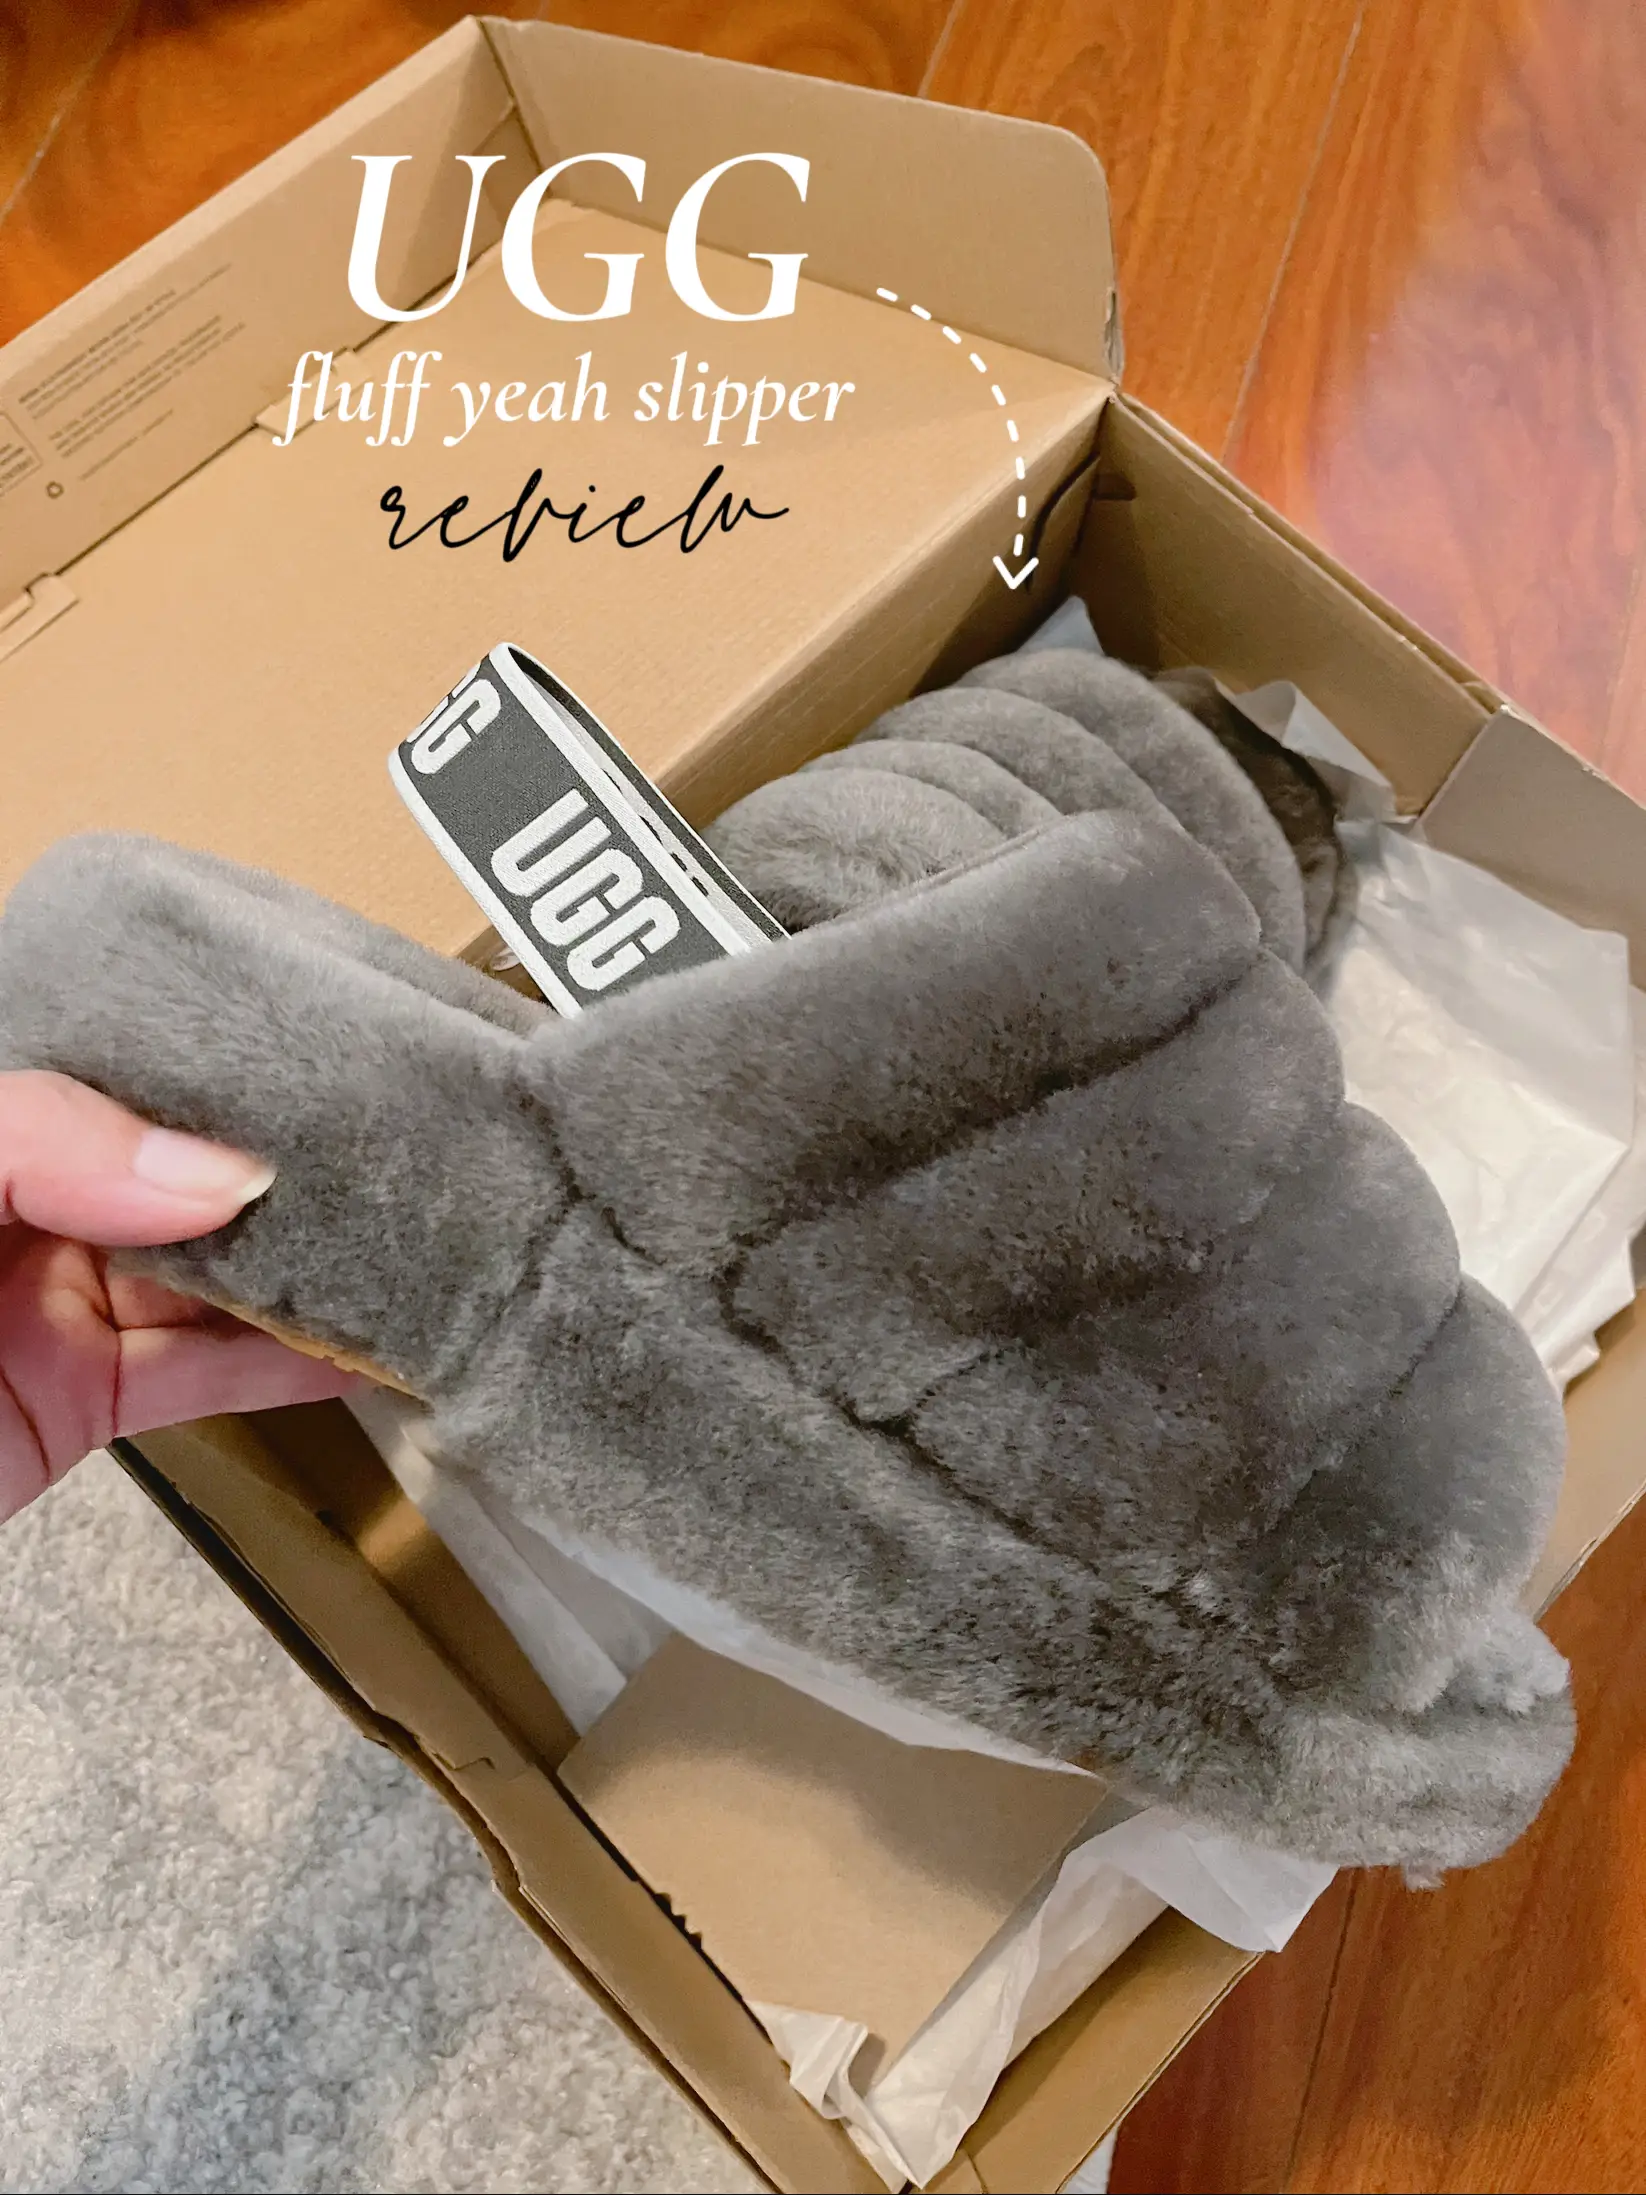 UGG fluff yeah slippers review    | Caitlin 🧚🏻‍♀️が投稿した